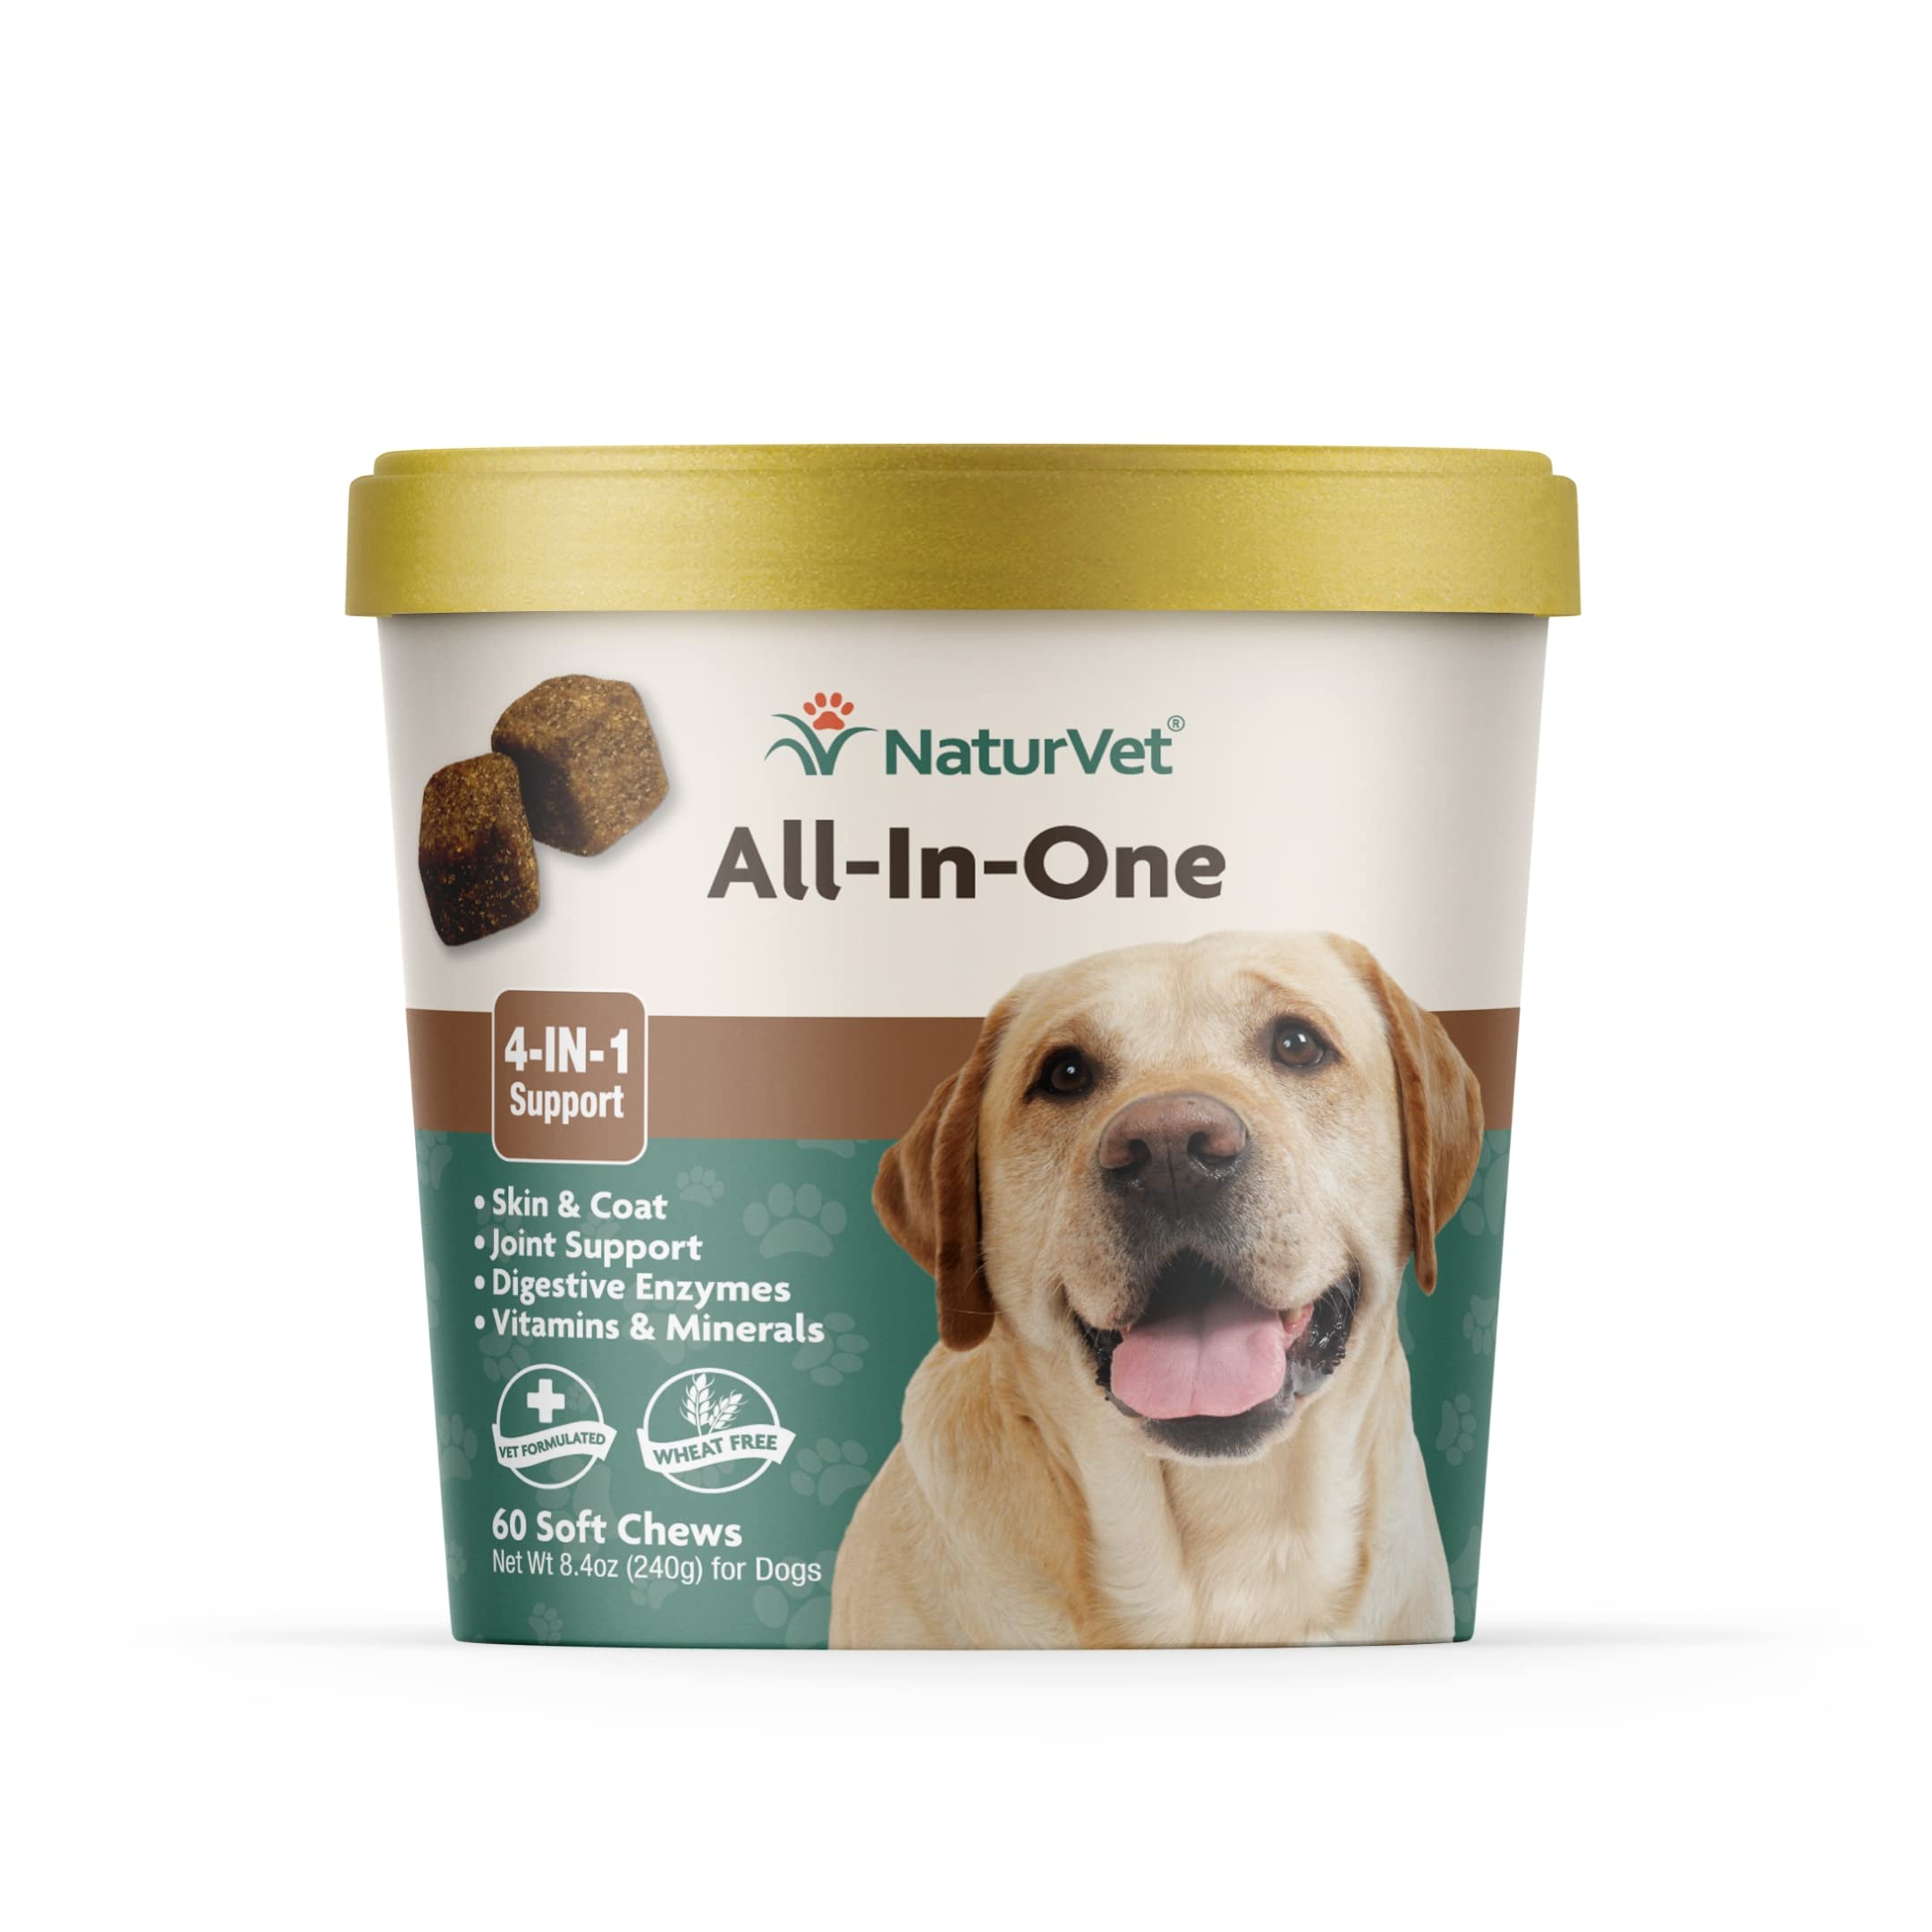 Naturvet All-In-One (4-IN-1 Support) Soft Chews